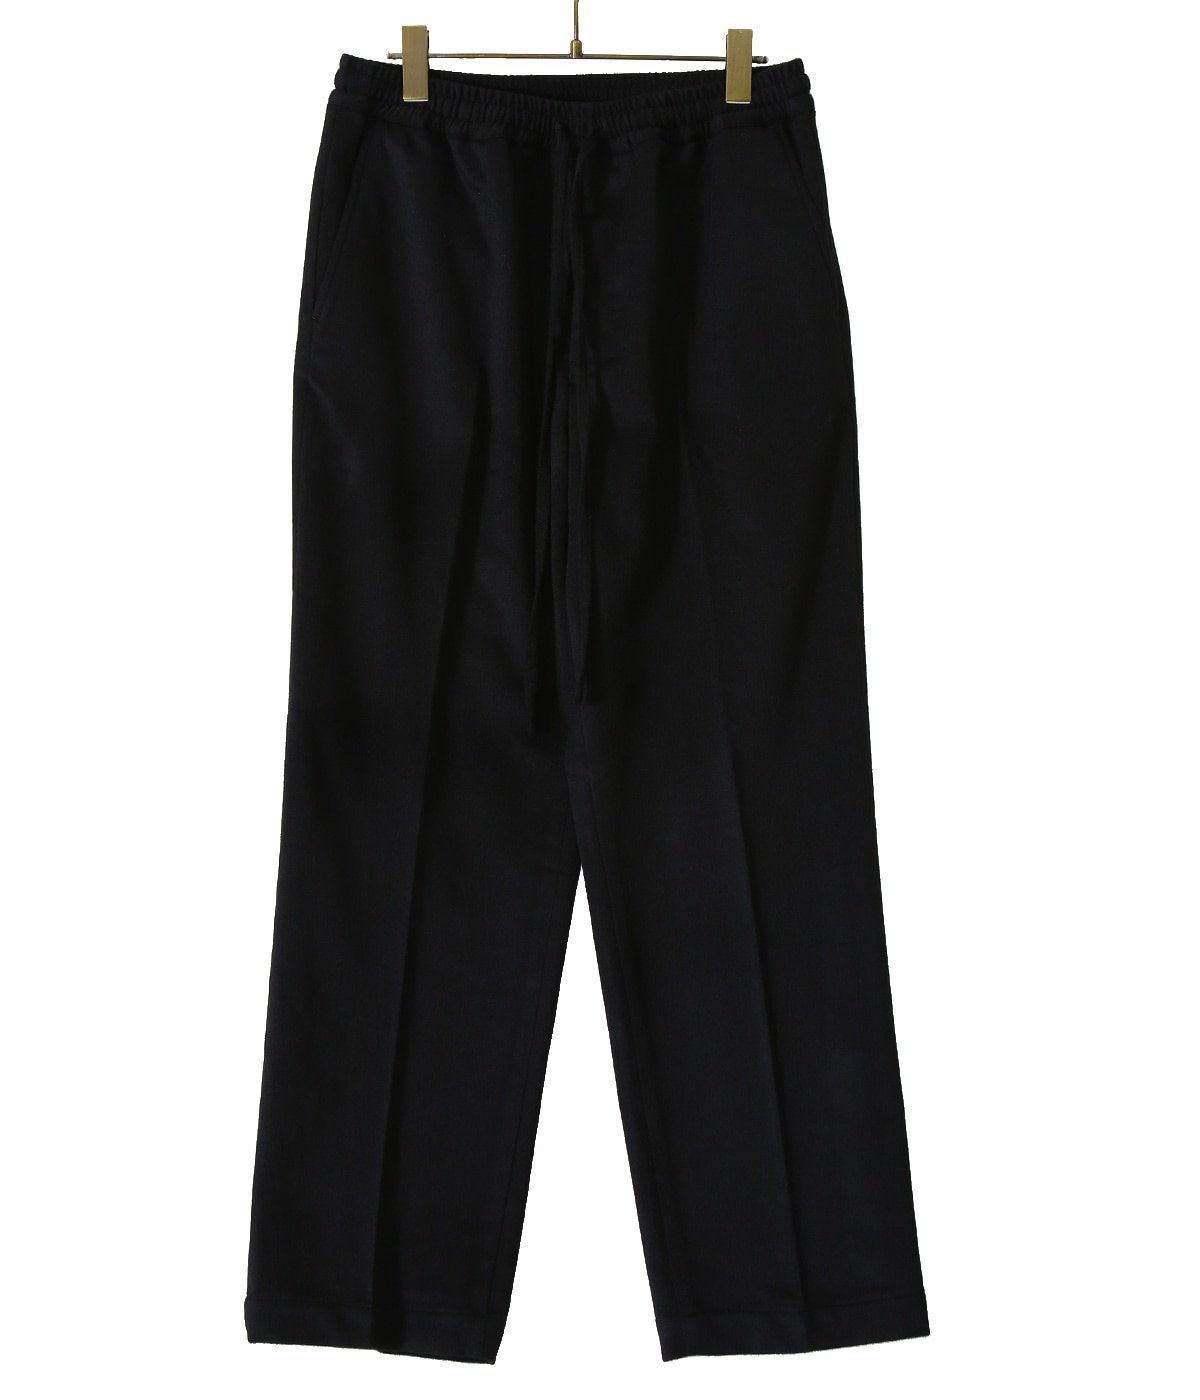 FLAT FRONT EASY PANTS